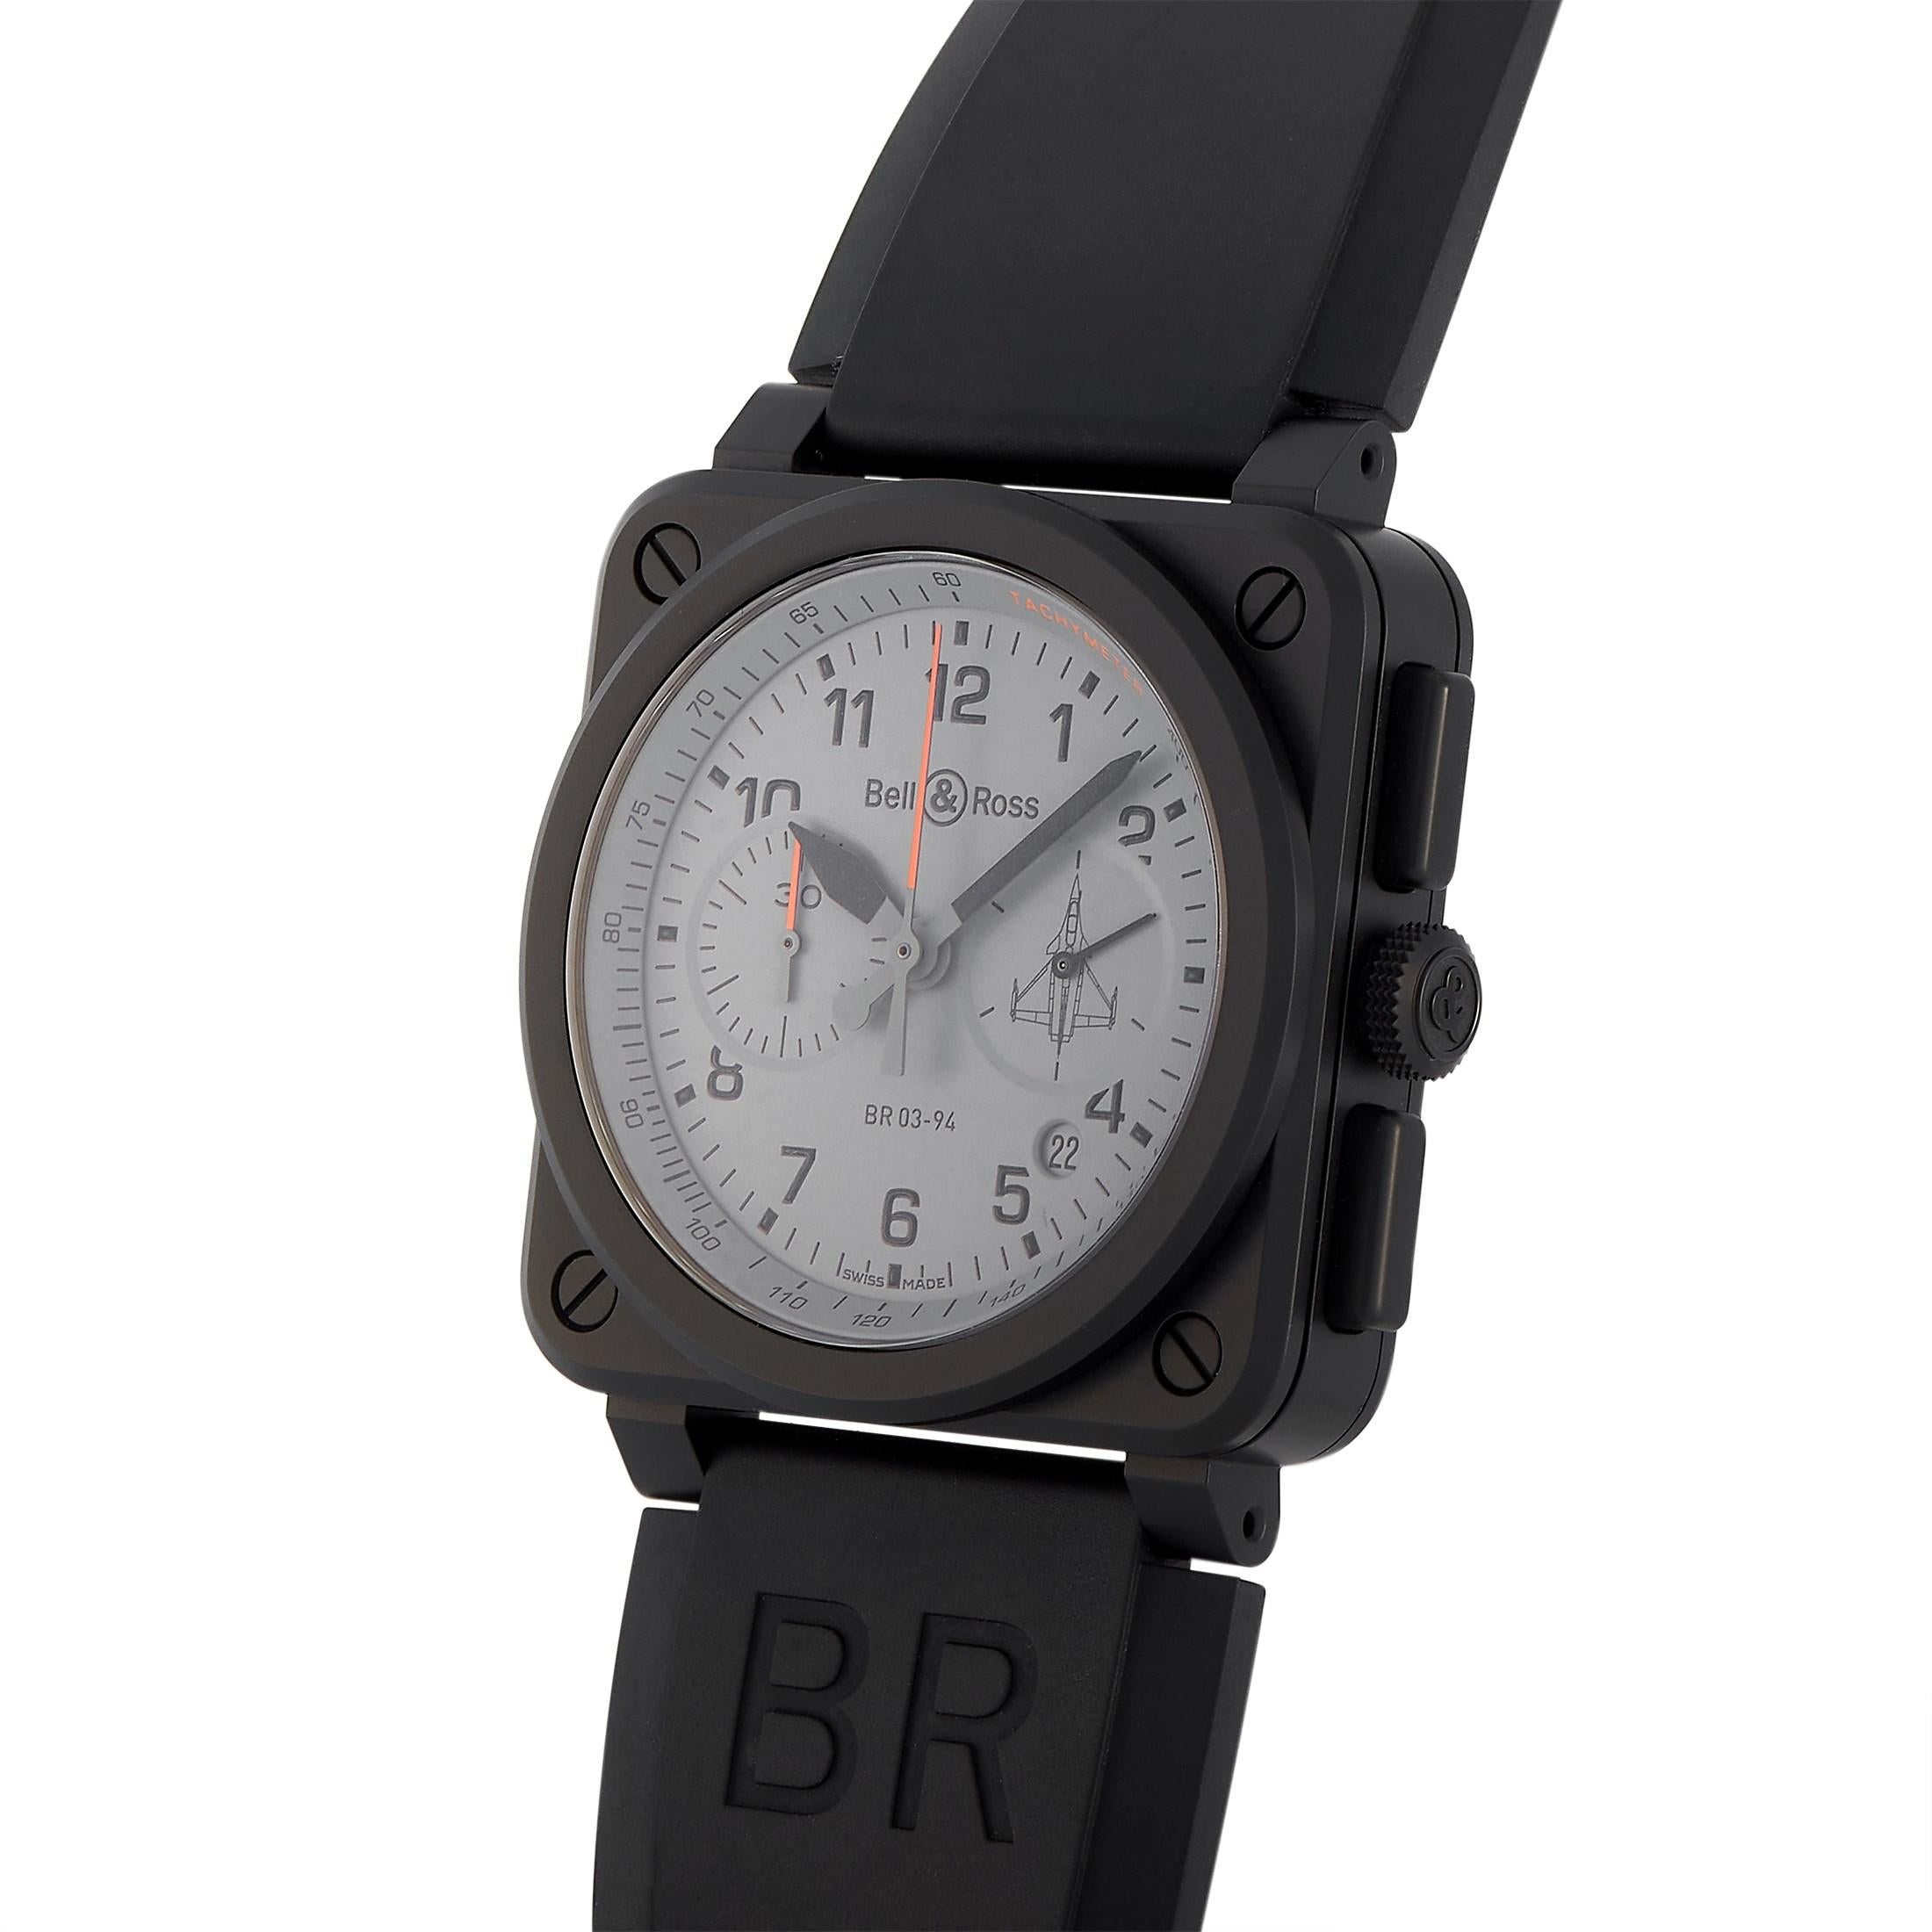 This watch from Bell & Ross features the iconic Bell & Ross square case shape with a round bezel that is highly recognizable. The case is made of black ceramic and measures 42mm. It is presented on a black rubber strap with tang closure. The grey